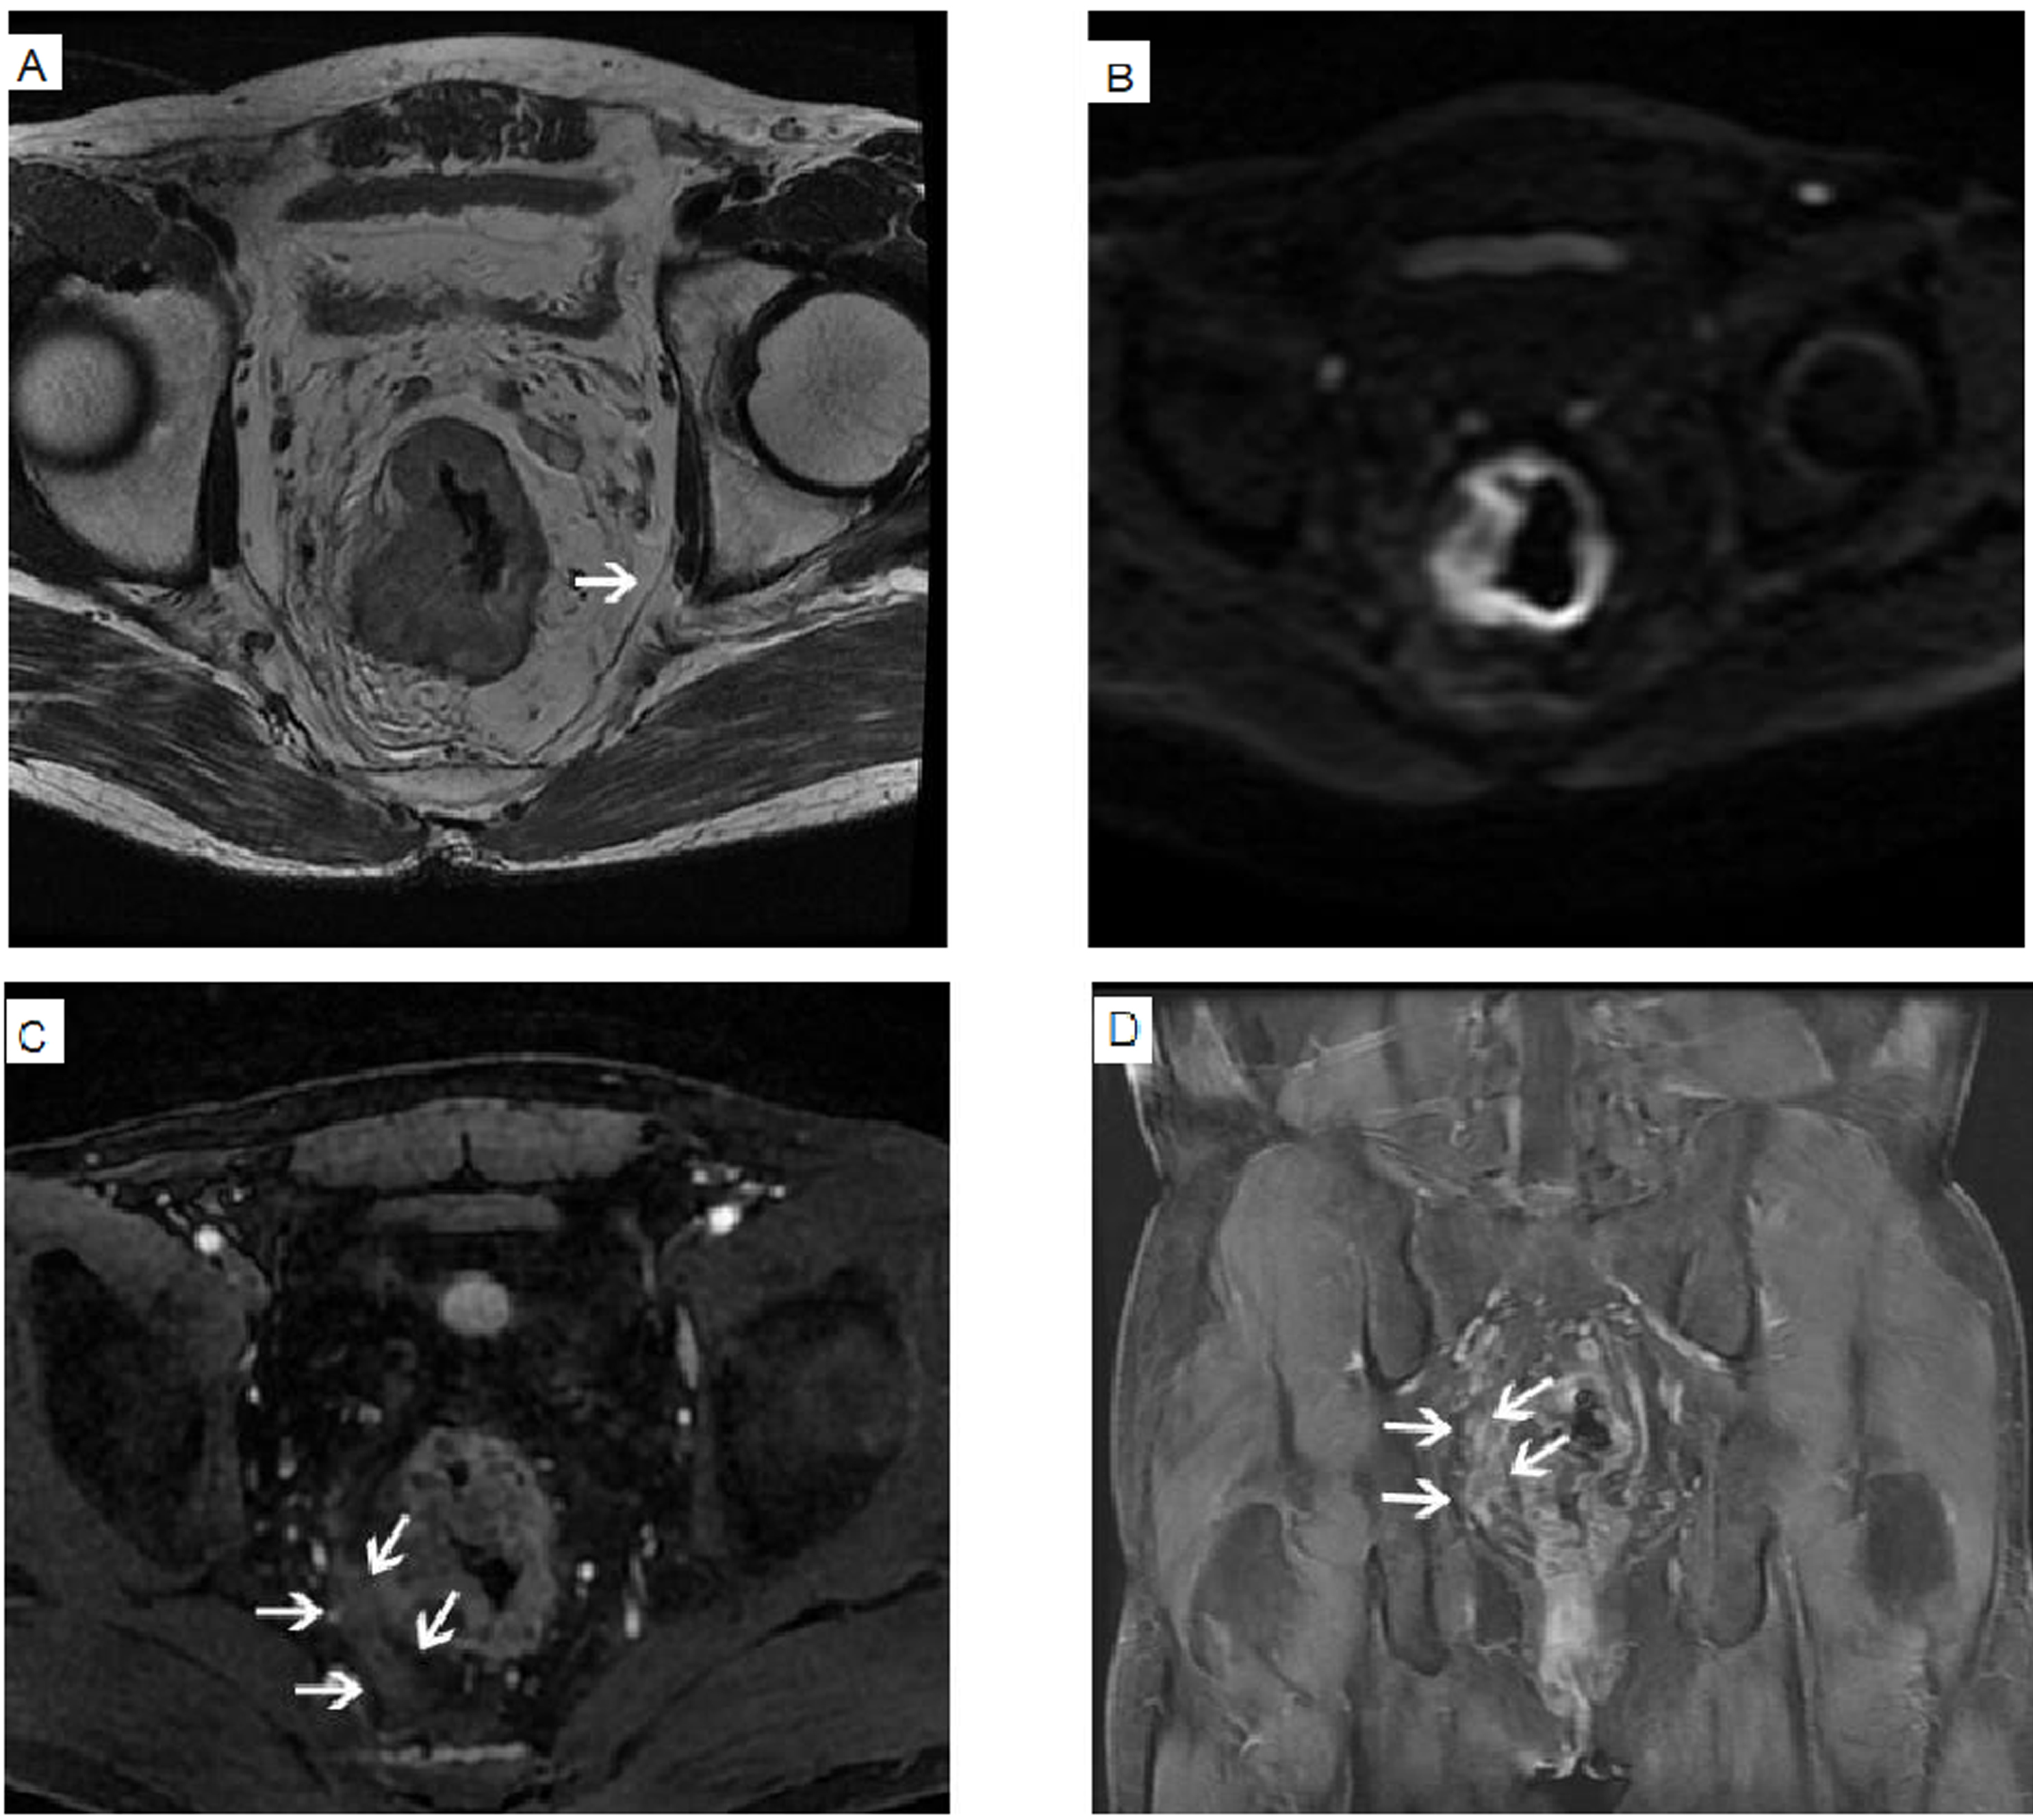 MR images after neoadjuvant therapy. A 71-year-old male presented with bloody and emaciation stool for half a year. Pathological examination revealed invasion of mesorectal fascia. Figure 2A axial T2WI showed that the rectal wall was unevenly thickened, and the limitation was prominent outside the contour of the intestinal wall. The T2 signal of the thickened intestinal wall was slightly higher, and the internal spotted higher T2 signal was visible. The mesorectal fascia (white arrow) was seen around it. According to the HR-T2WI image, the tumor did not invade the mesorectal fascia. Figure 2B axial DWI showed increased signal in the thickened rectal wall. According to HR-T2WI combined with DWI, the tumor did not invade the mesorectal fascia. Figure 2C–D axial and coronal DCE-MR showed that the thickened rectal wall was significantly thickened and significantly enhanced. The right side of the rectum was accompanied by patchy enhancement. The enhancement mode was consistent with the main body of the tumor. Combined with HR-T2 WI, it was suggested that the tumor invaded the mesorectal fascia.